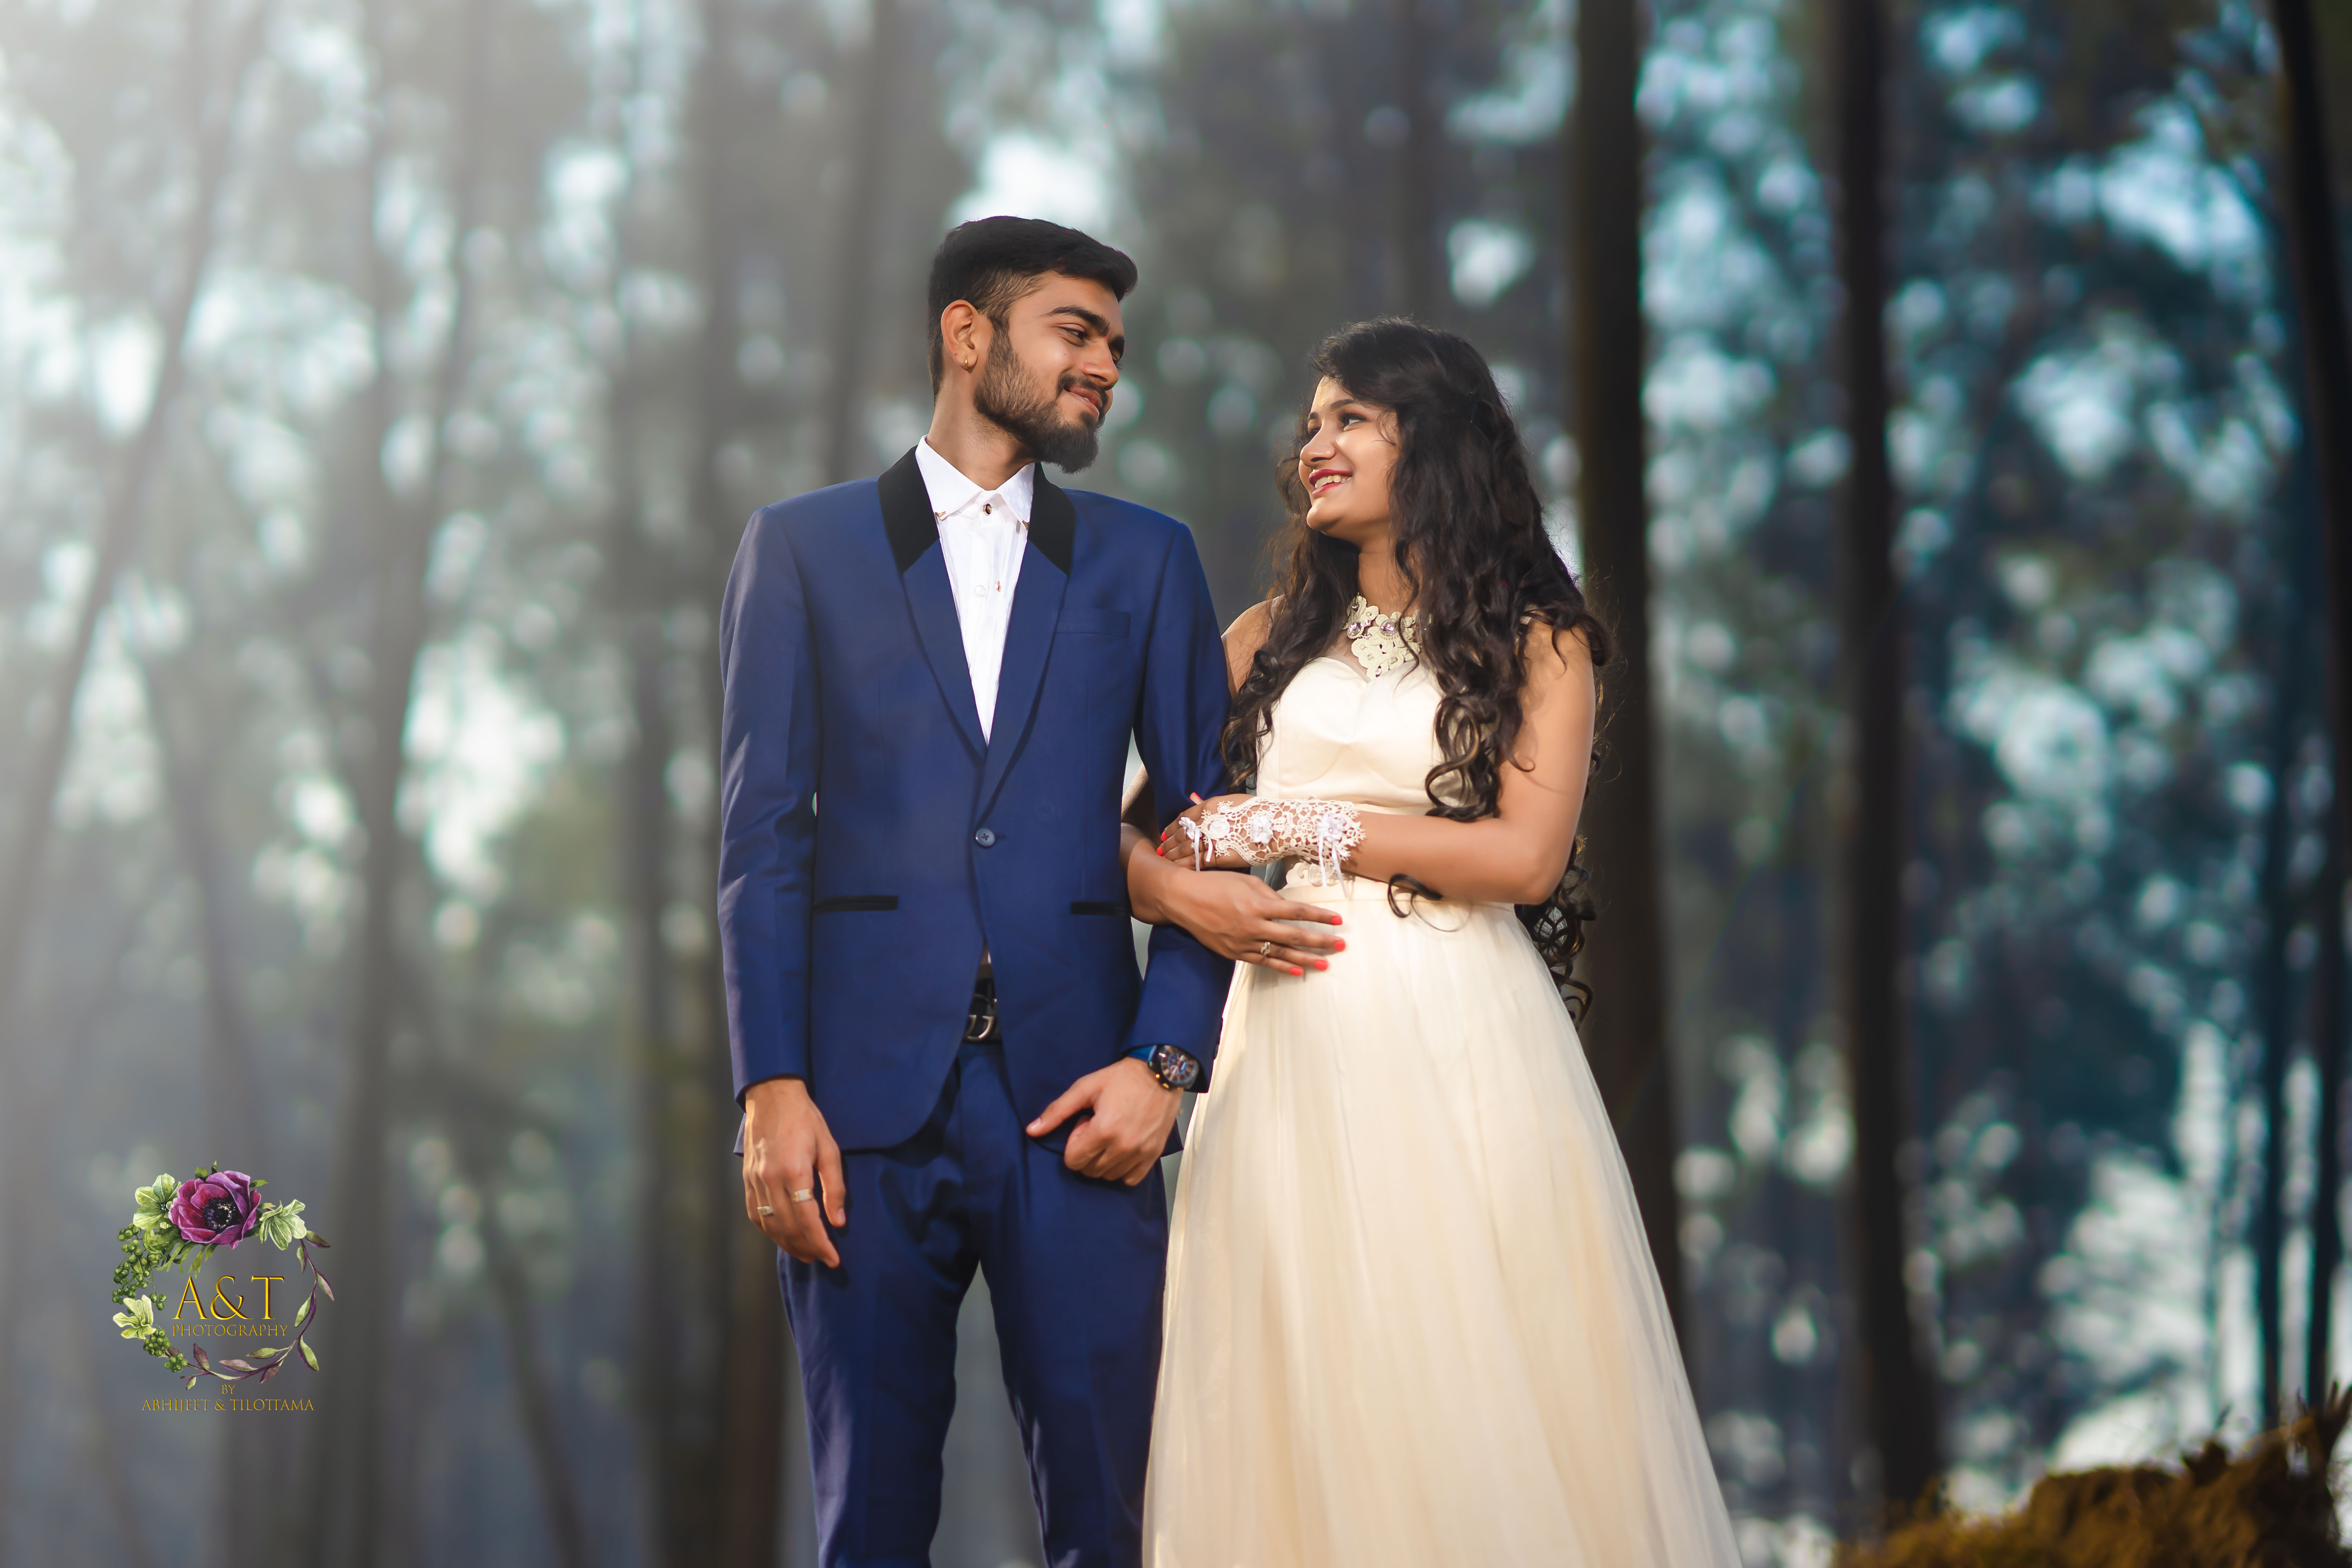 Senorita Theme Prewedding Photoshoot of Dharmik and Jinal where both are walking and looking at each other